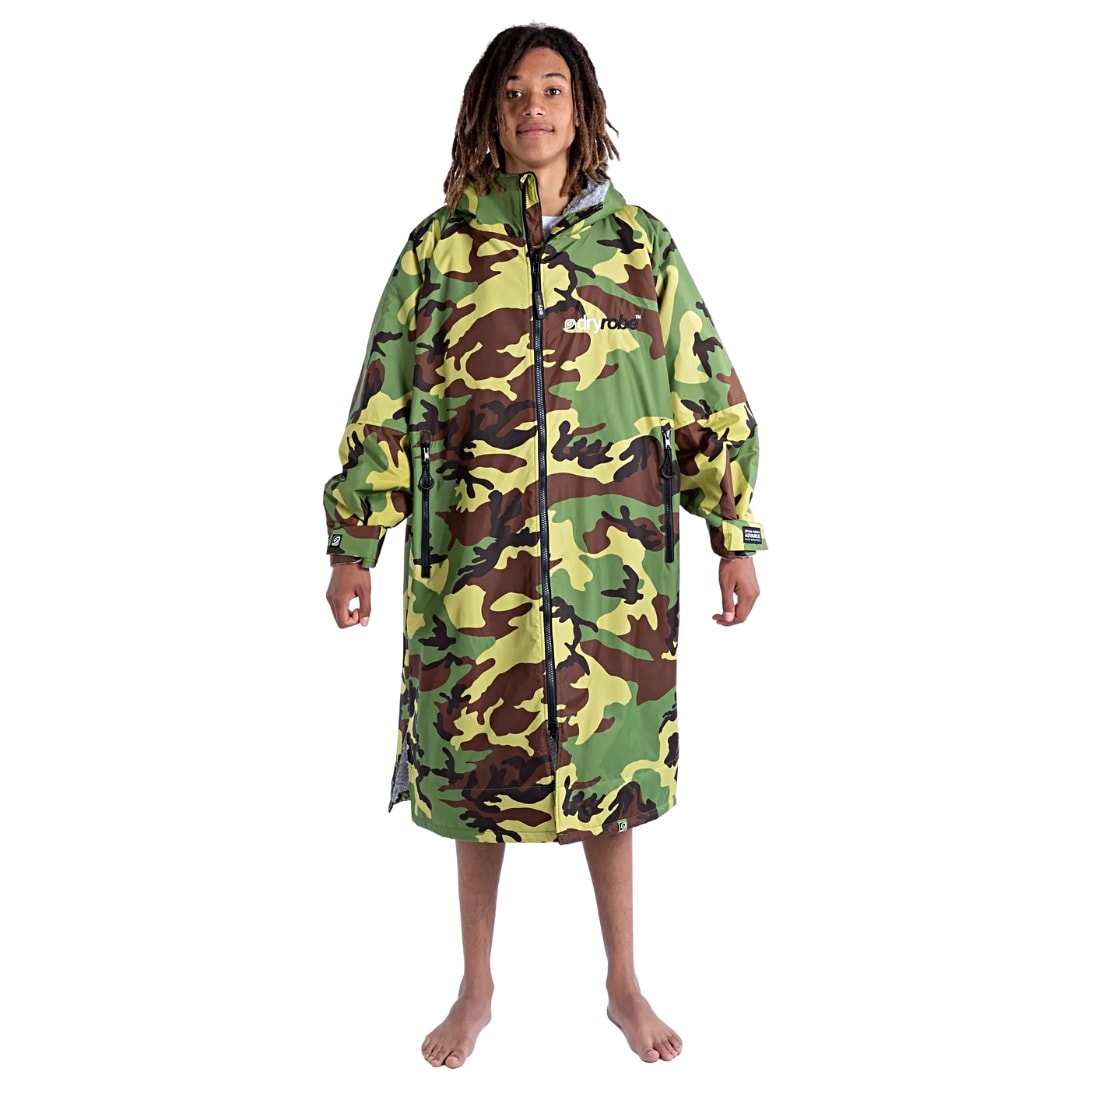 Dryrobe Advance Long Sleeve Drying & Changing Robe - Camouflage/Grey - Changing Robe Poncho Towel by Dryrobe